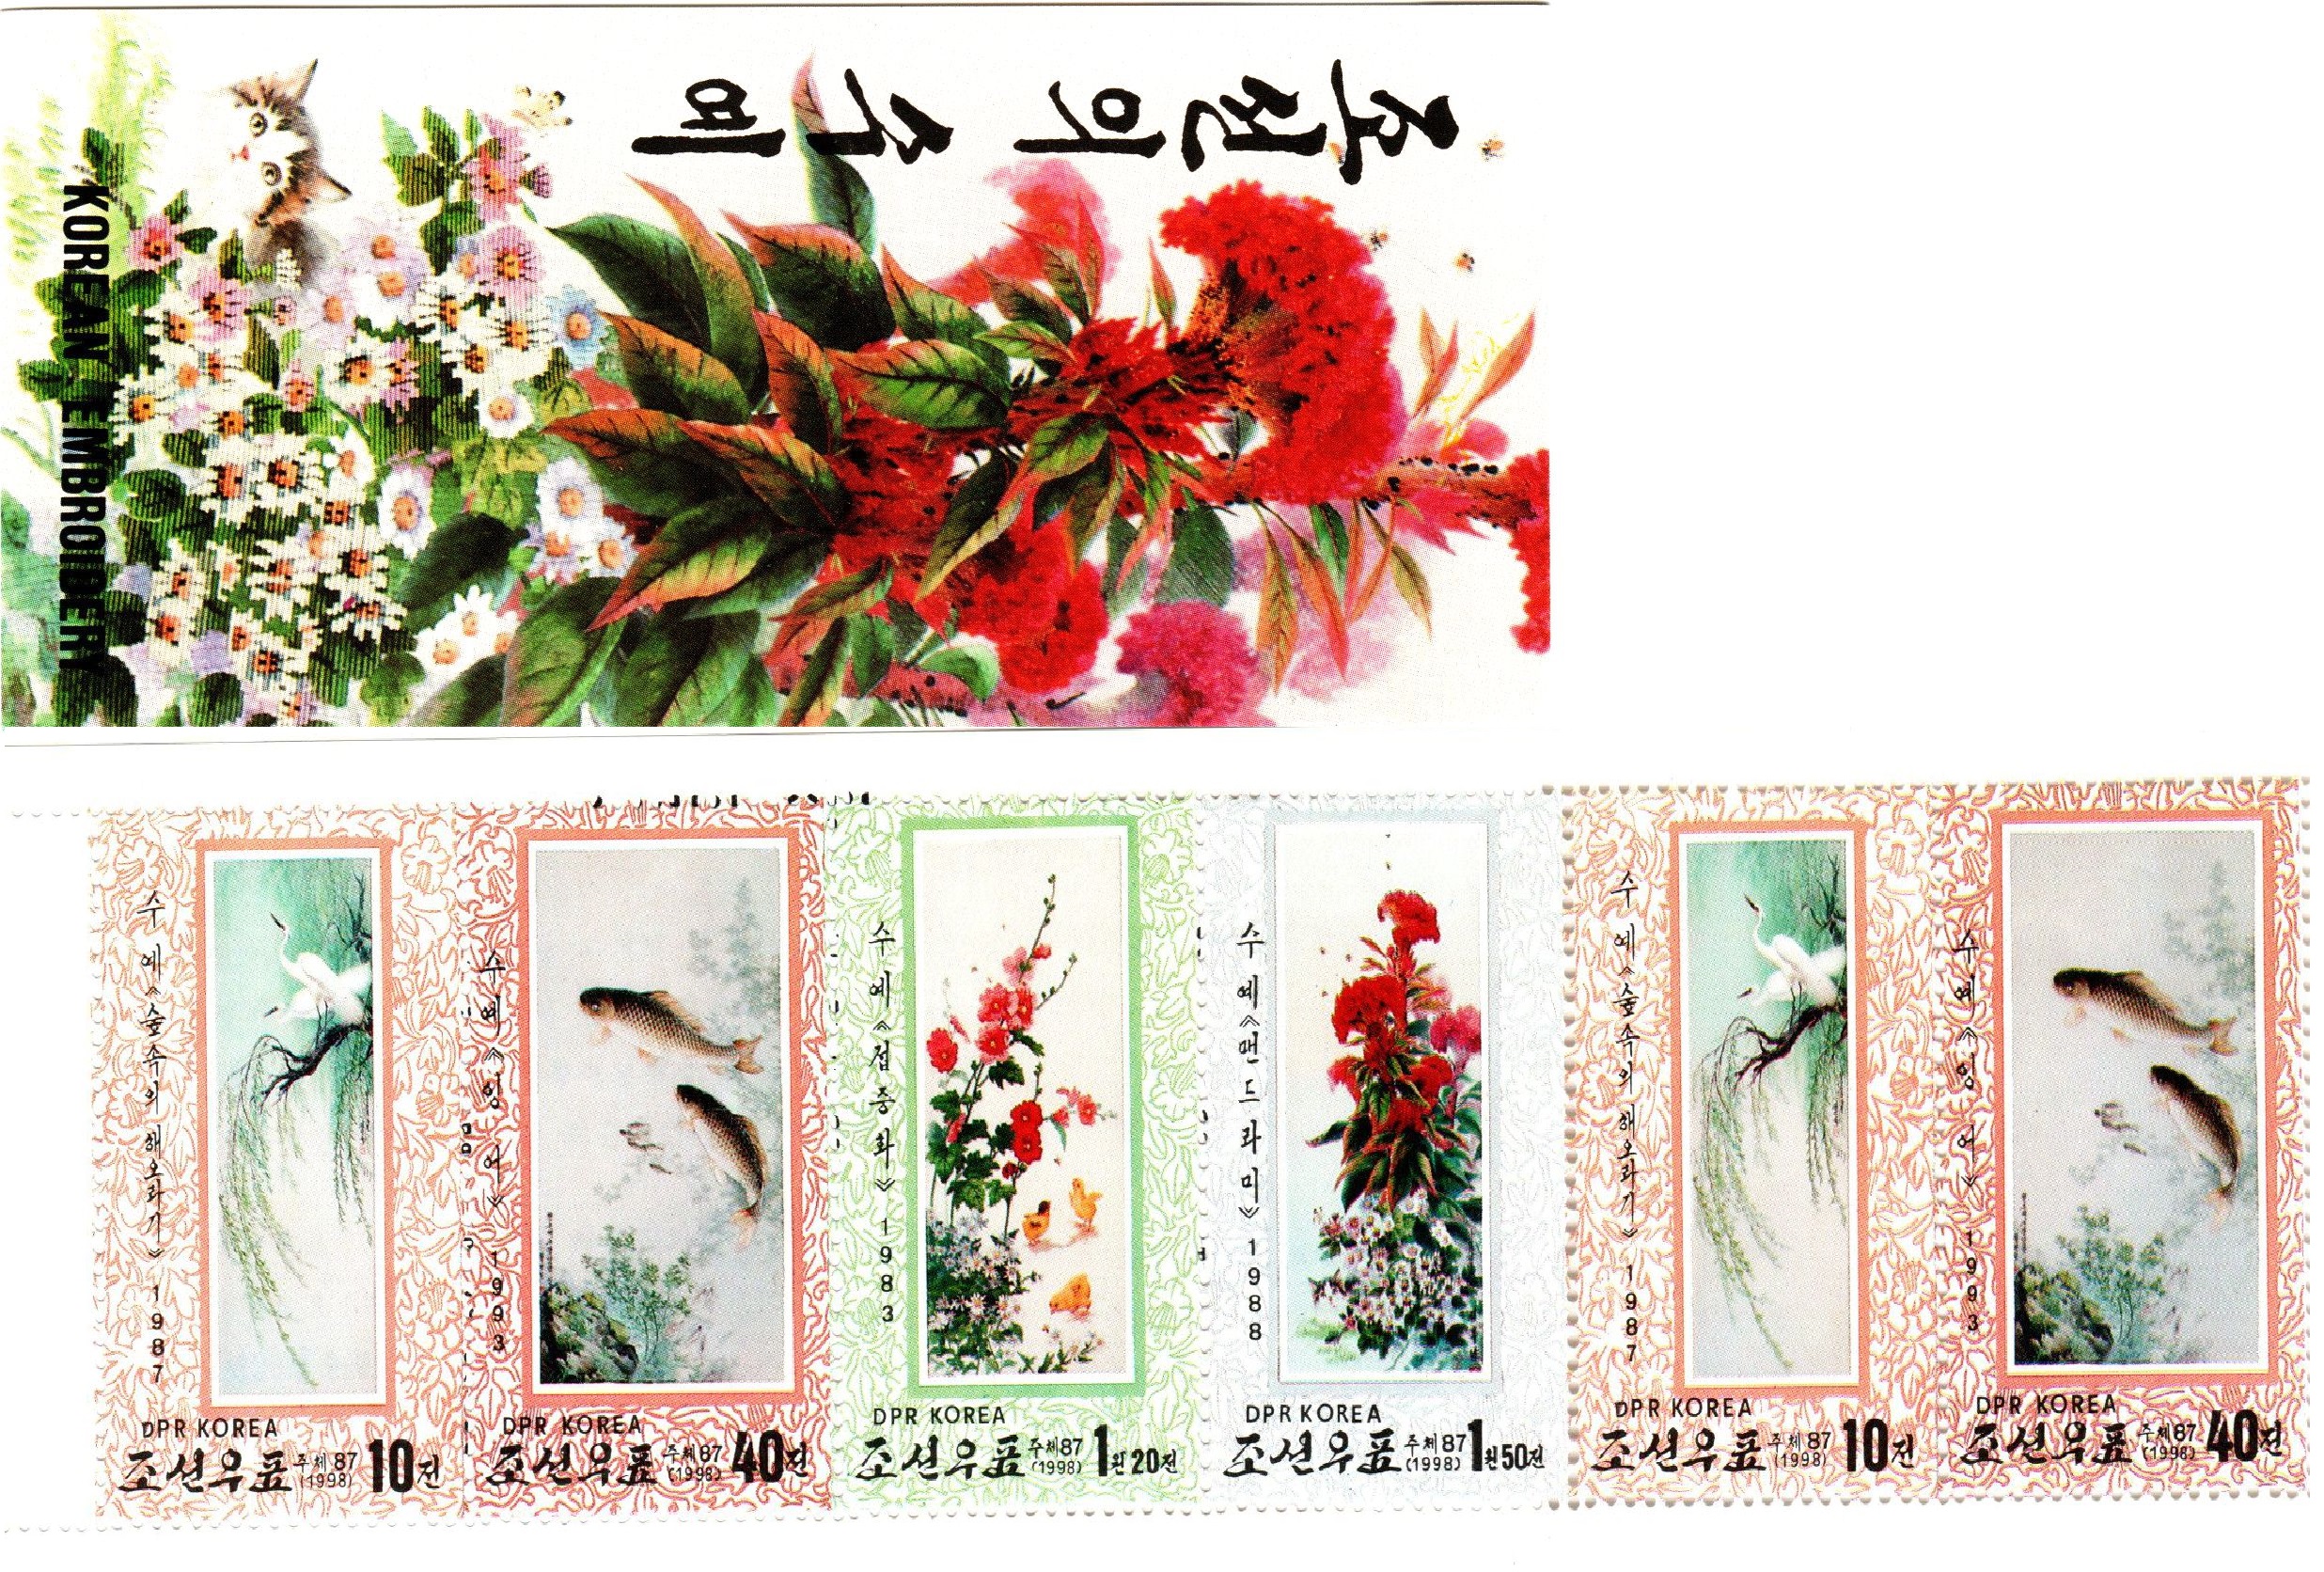 L9102, Korea "Embroidery" Stamp Booklet, 1998